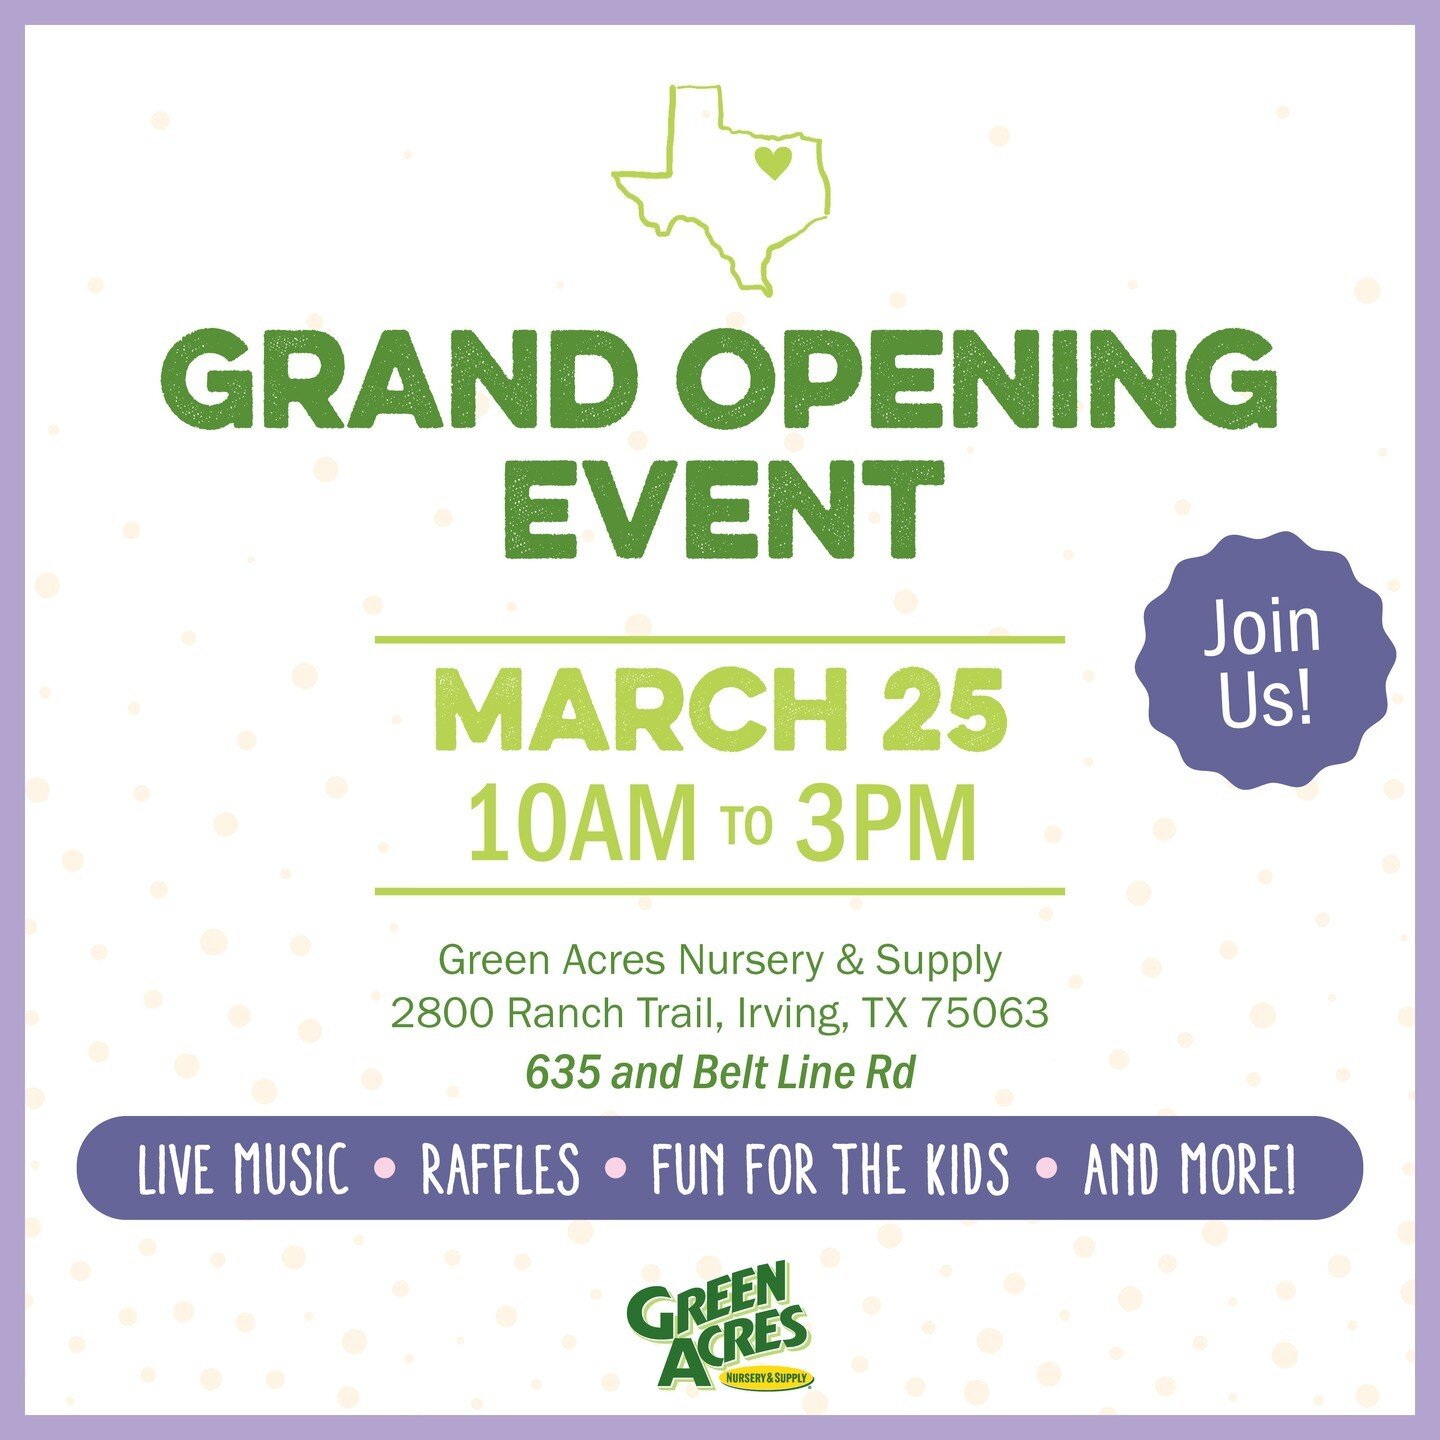 Help us give a big Texas welcome to our newest neighbor at Cypress Waters!  Join the fun at the official Grand Opening event of Green Acres Nursery &amp; Supply, featuring live music, raffle drawings, kid-friendly fun, and more!  Saturday, March 25th